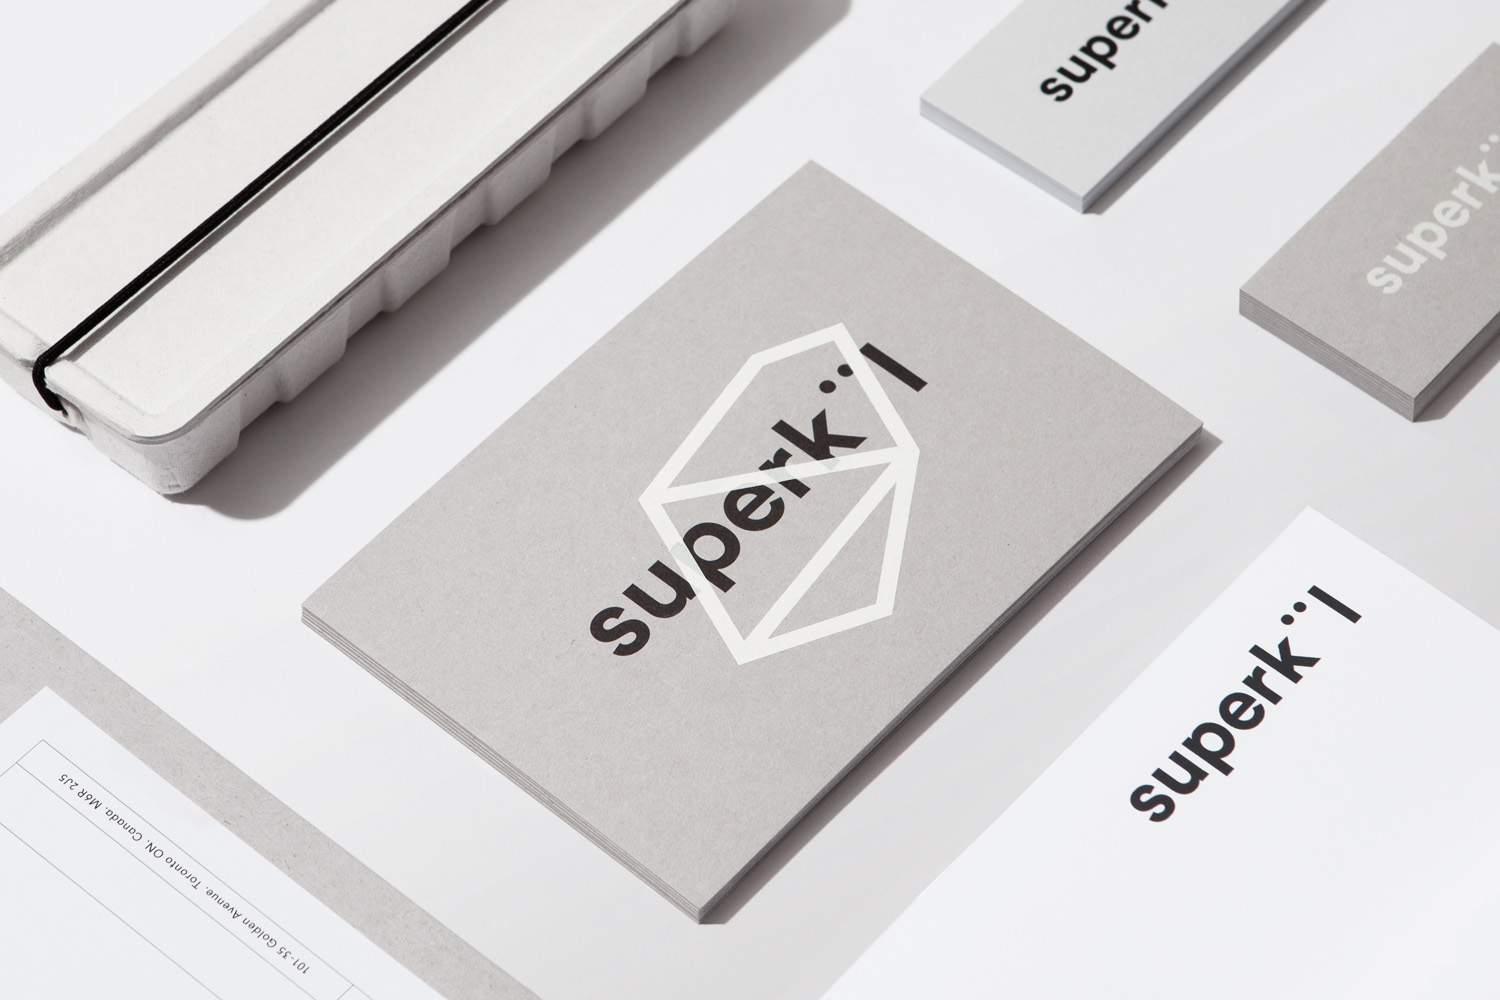 Brand identity and note card by Toronto-based graphic design studio Blok for Canadian architecture firm Superkül